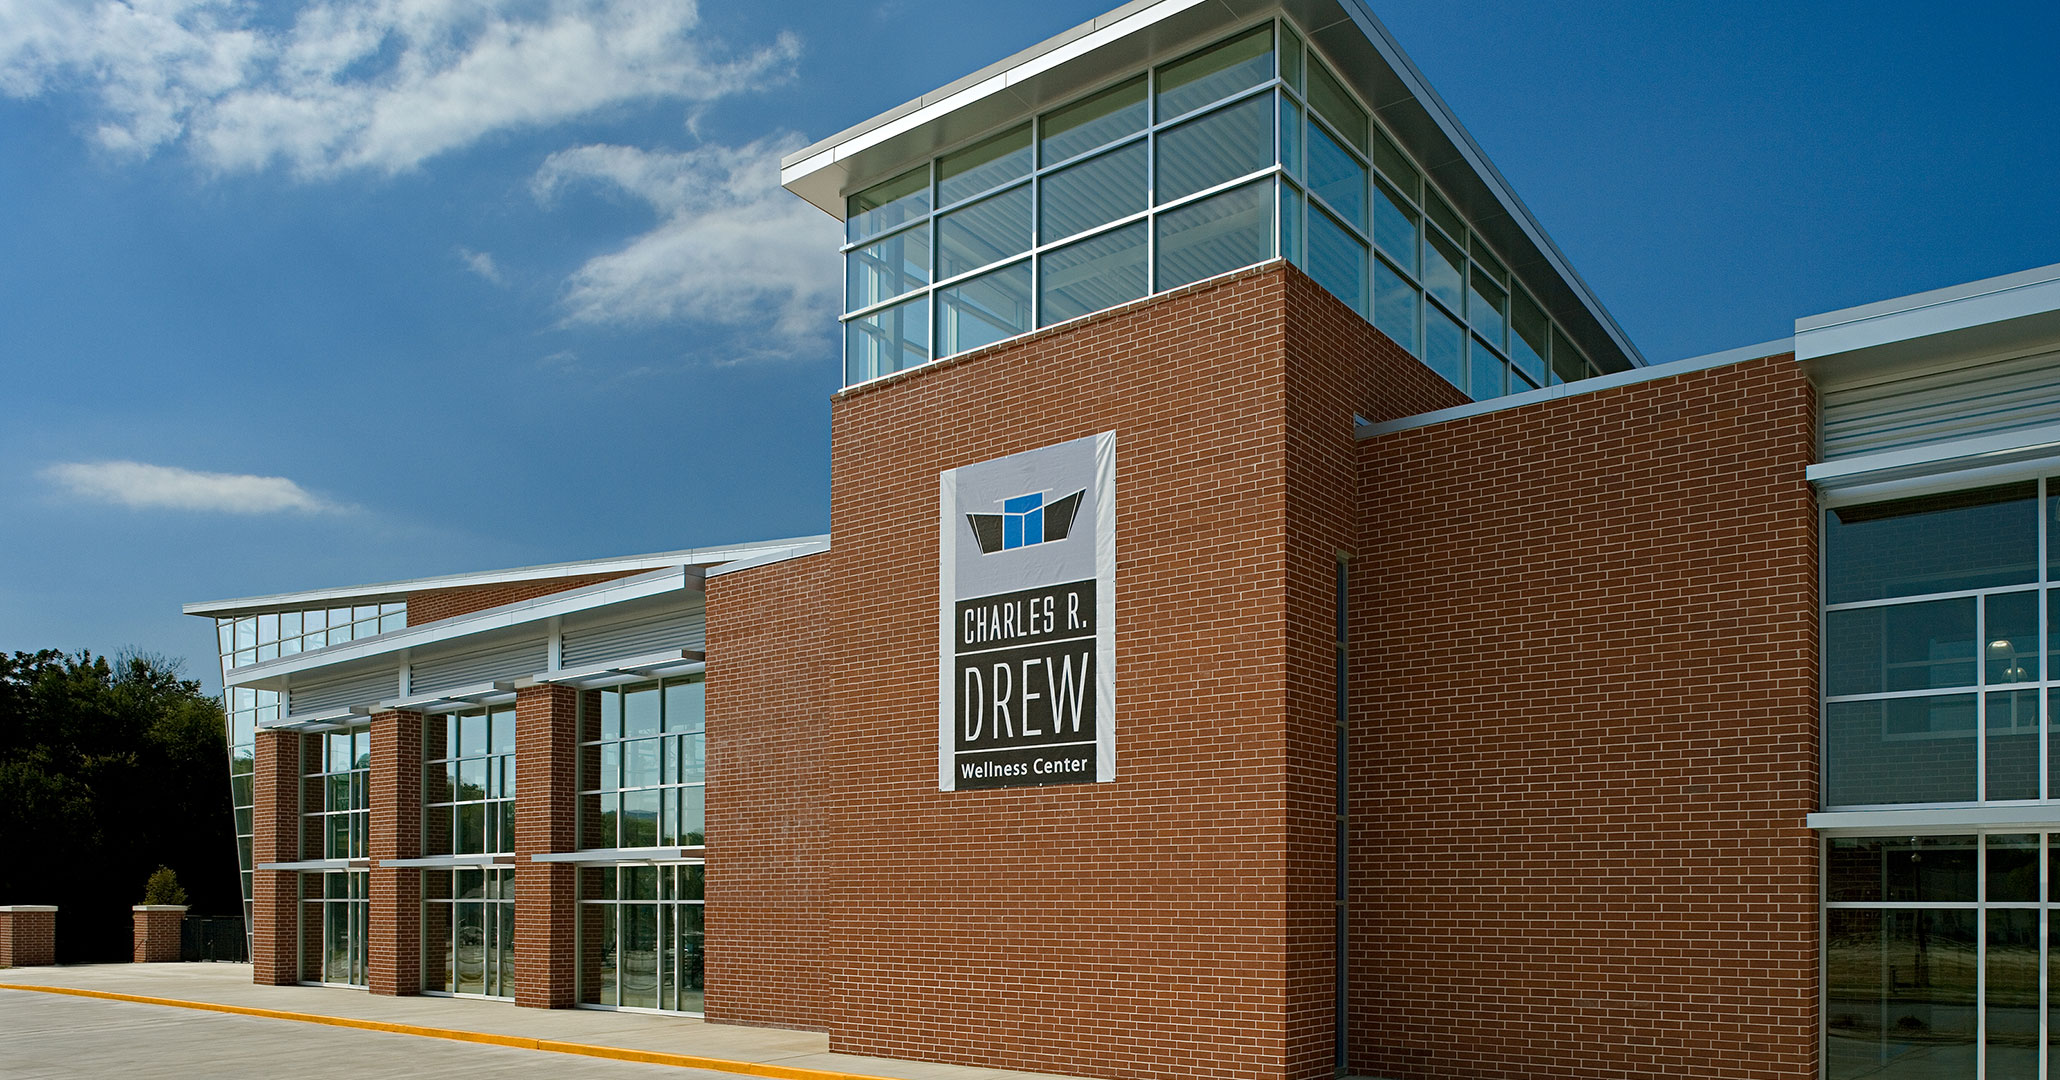 City of Columbia worked with Boudreaux architects to design the interiors at Drew Wellness Center.